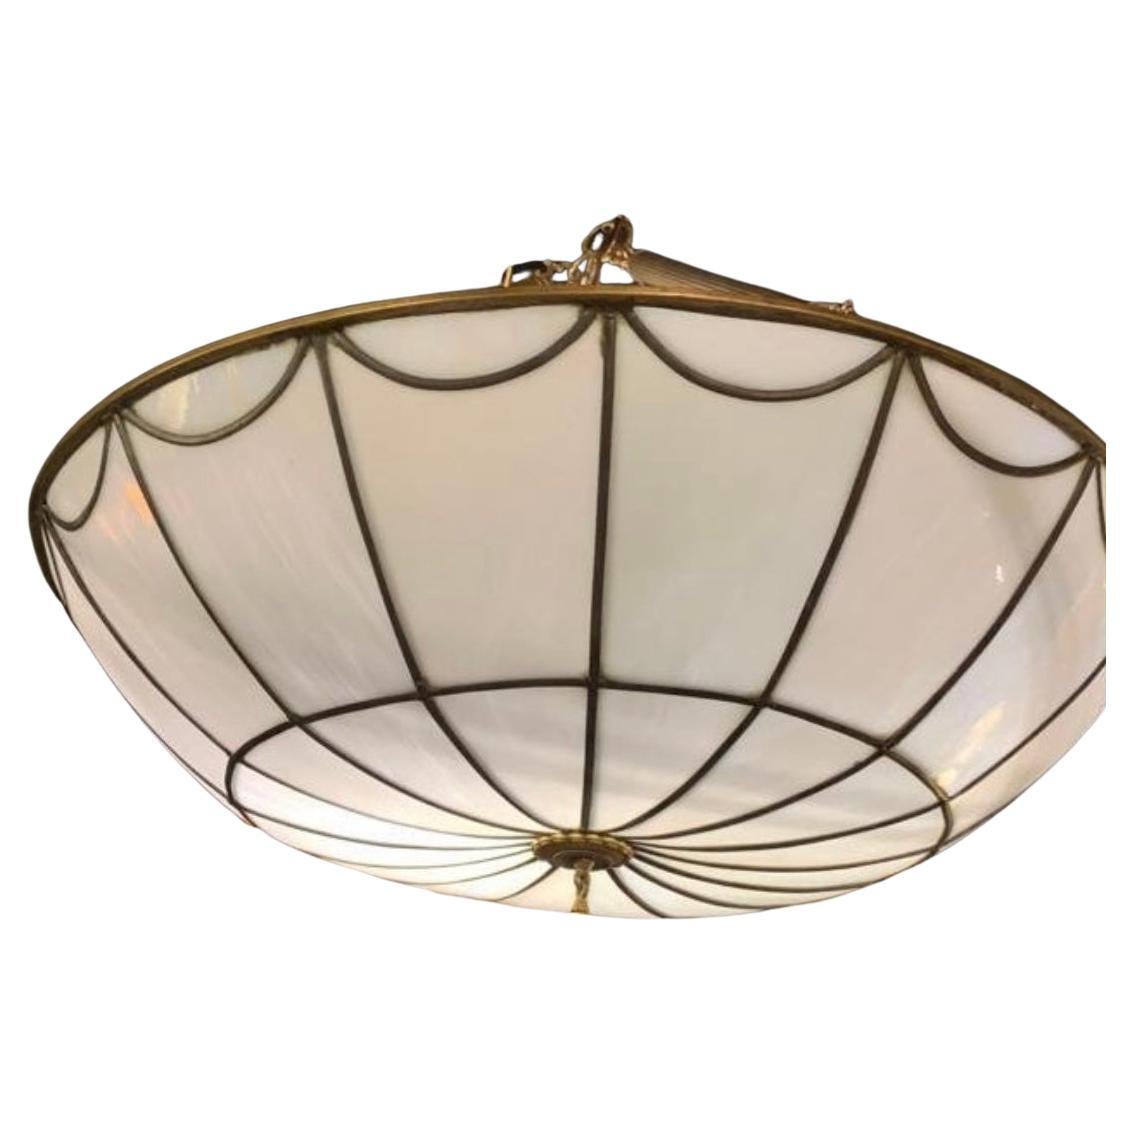 A circa 1920's large leaded glass light fixture with 8-10 interior lights.